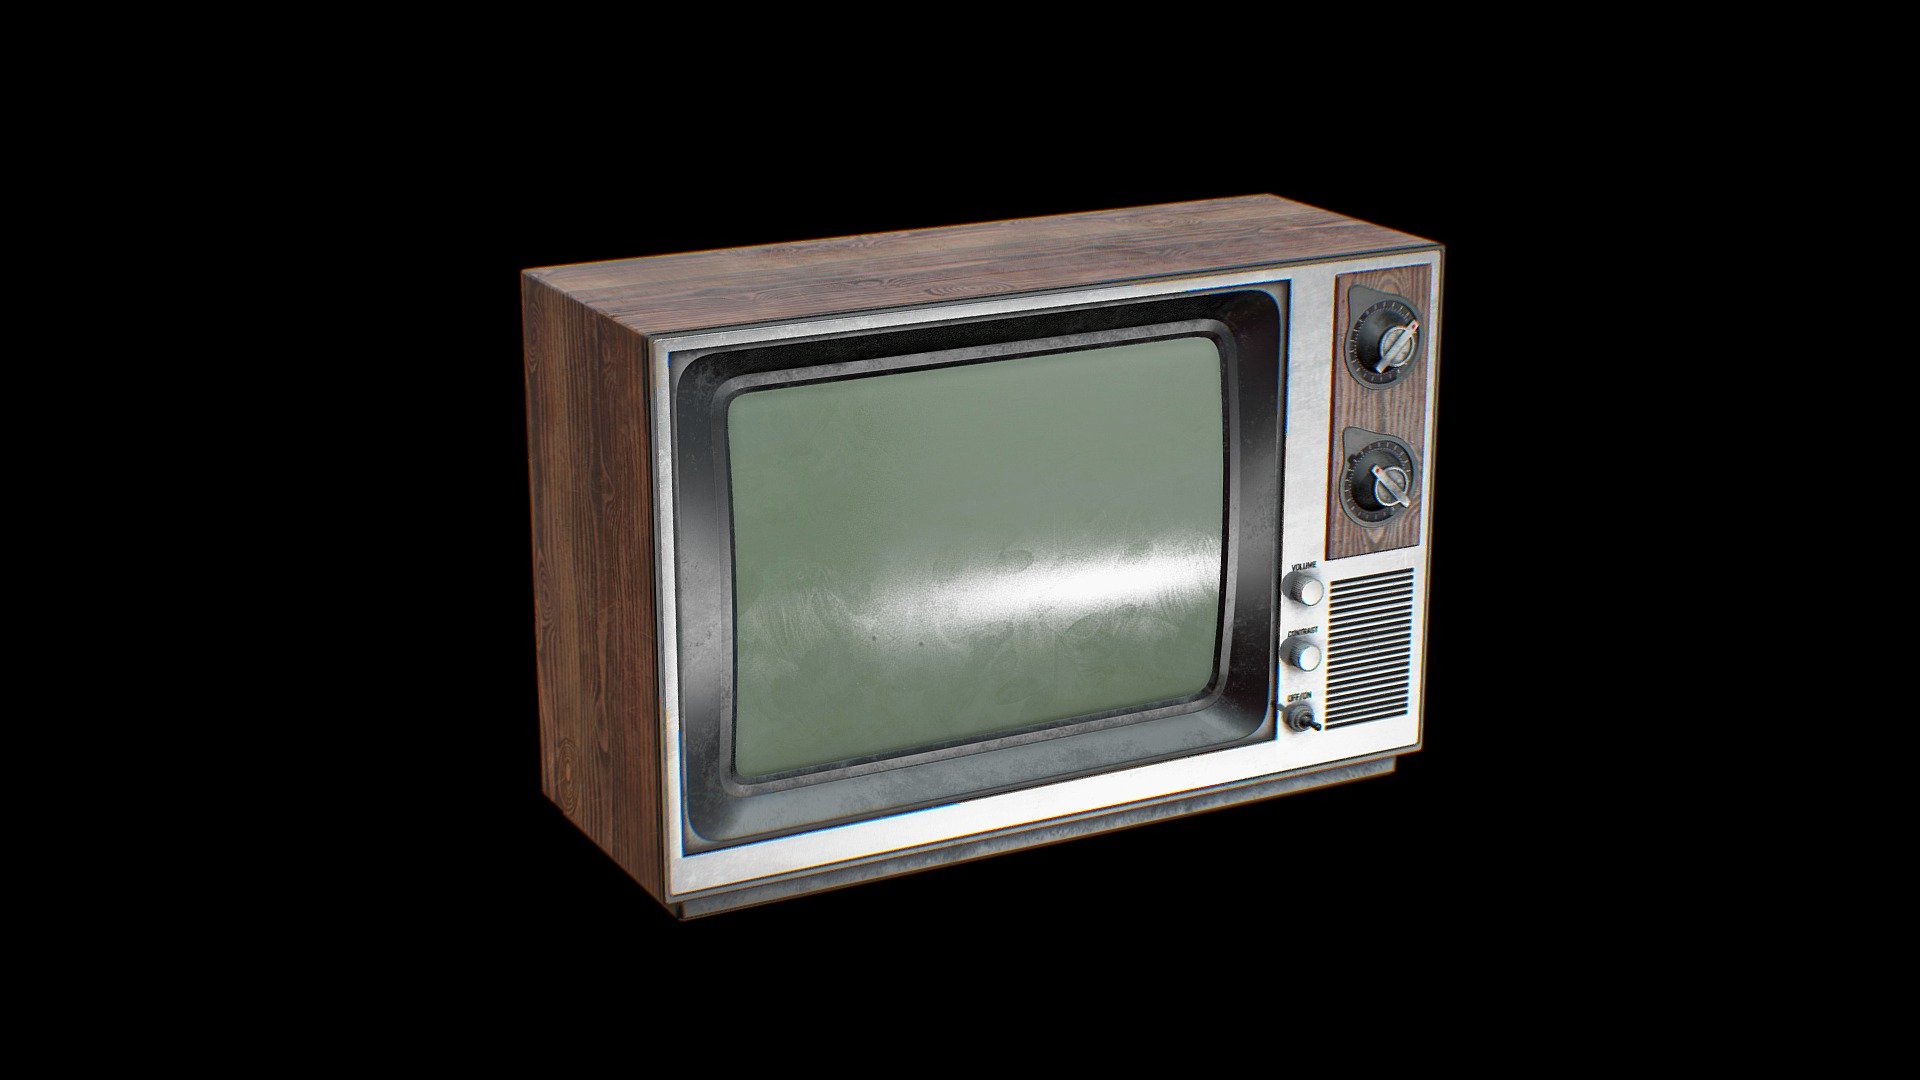 Free download：www.freepoly.org

If you like,Buy me a coffee maybe? https://www.buymeacoffee.com/riveryang - Old TV 02-Freepoly.org - Download Free 3D model by Freepoly.org (@blackrray) 3d model